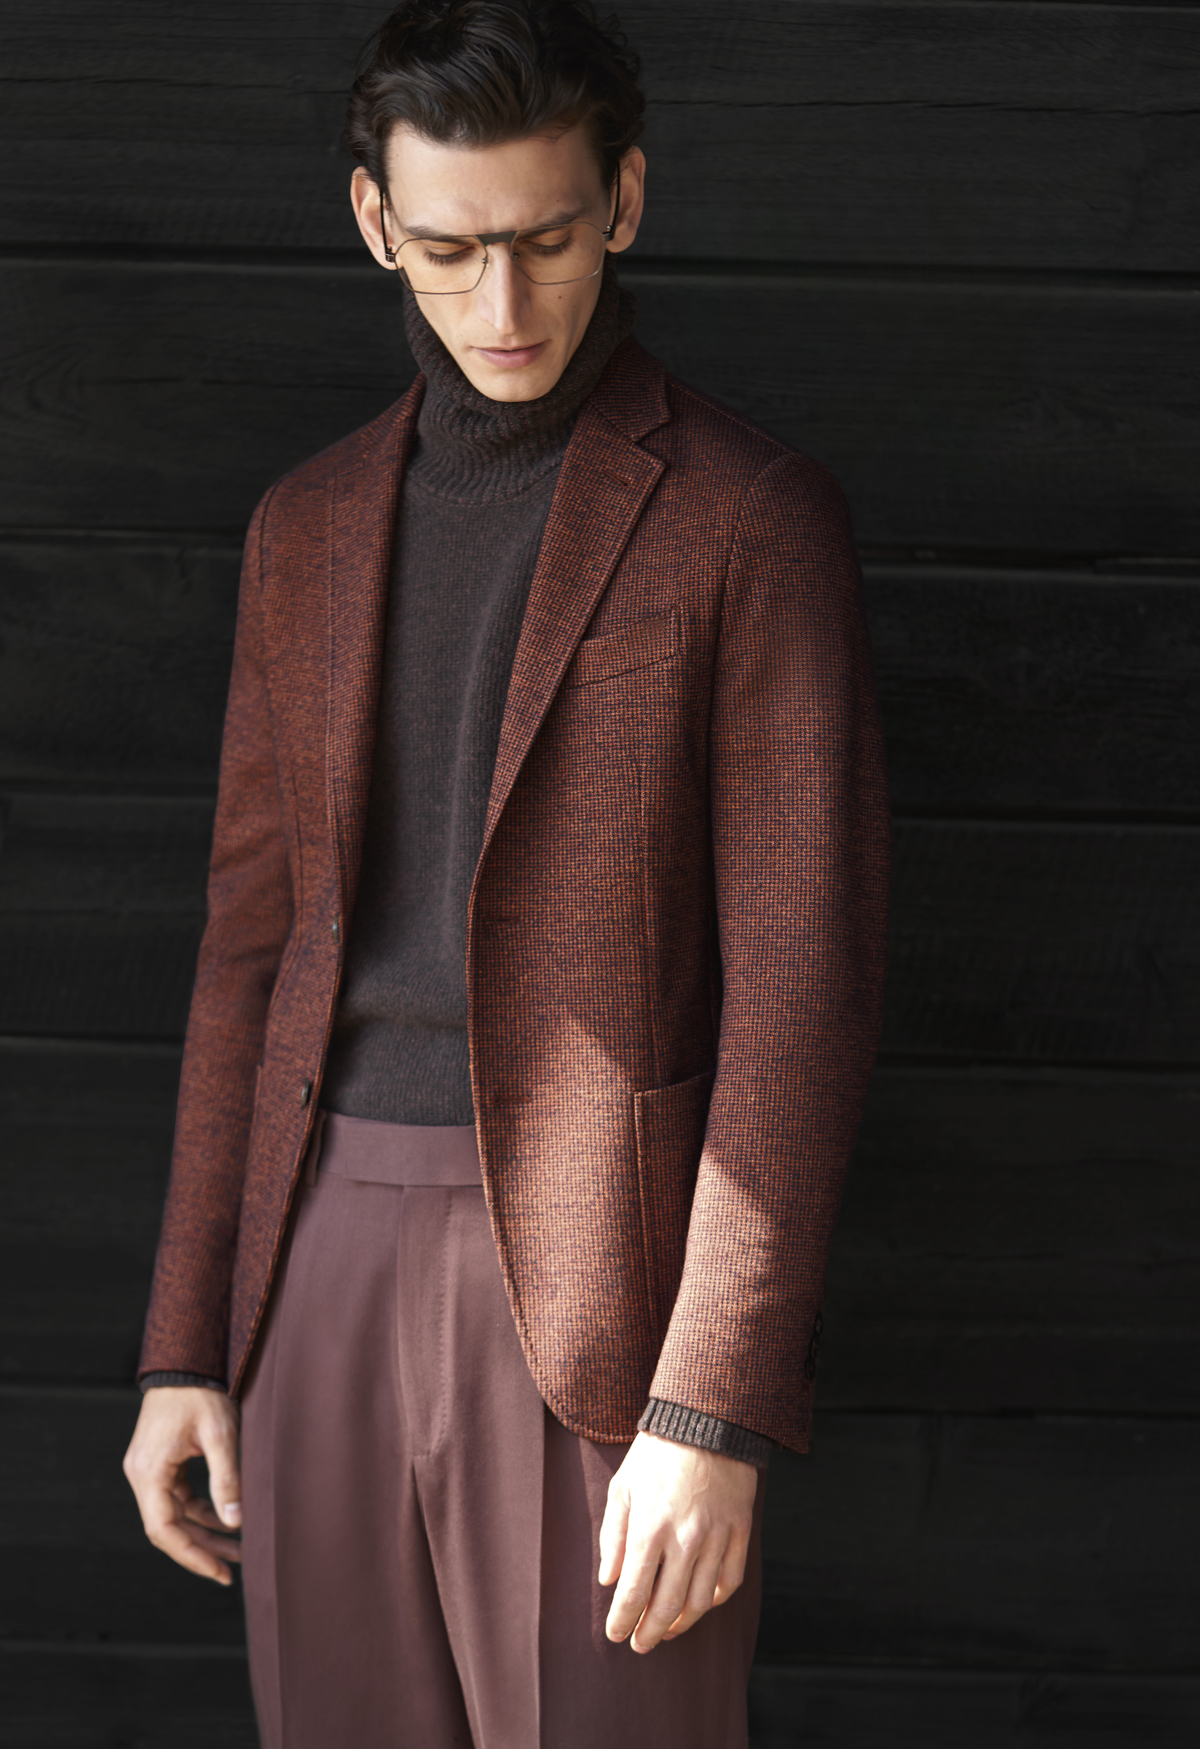 Model wearing maroon jacket with black sweater and light maroon pants all made by Zegna